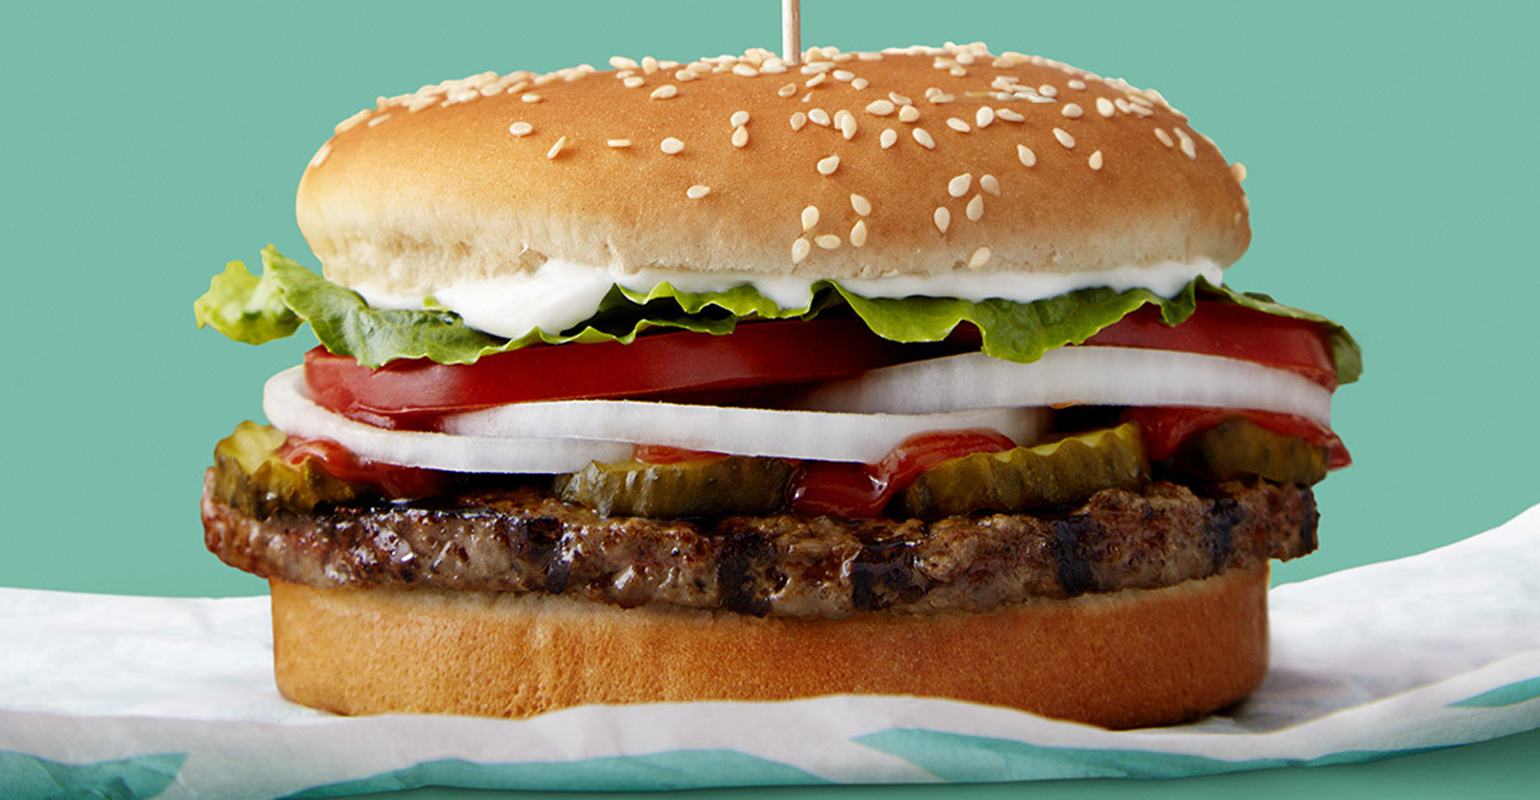 Burger King to introduce Impossible Whopper nationwide